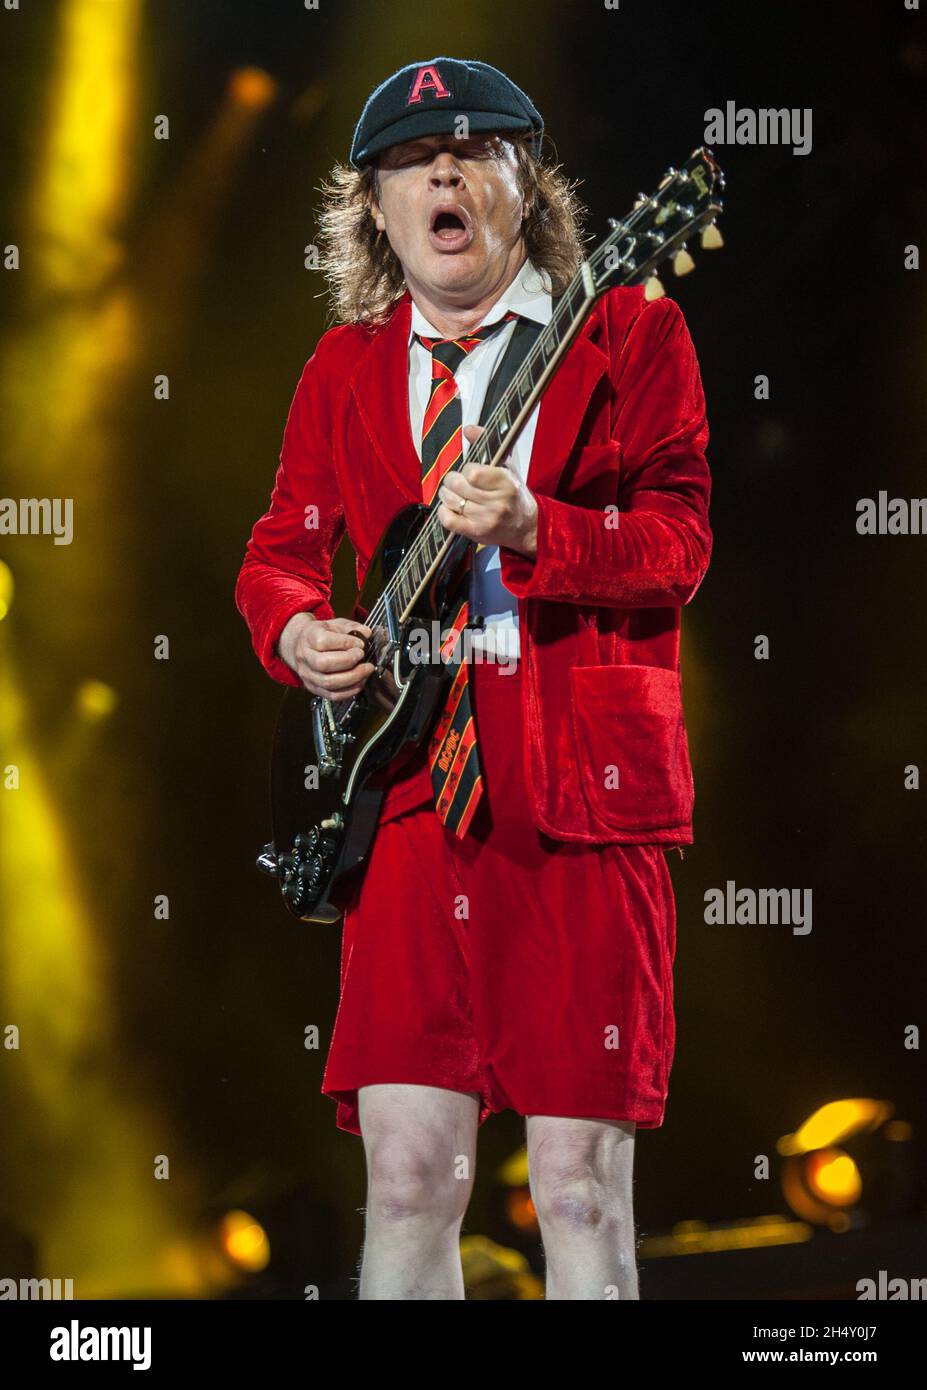 Angus Young of AC/DC performing live on stage at Wembley Stadium on July 04, 2015 in London, United Kingdom Stock Photo